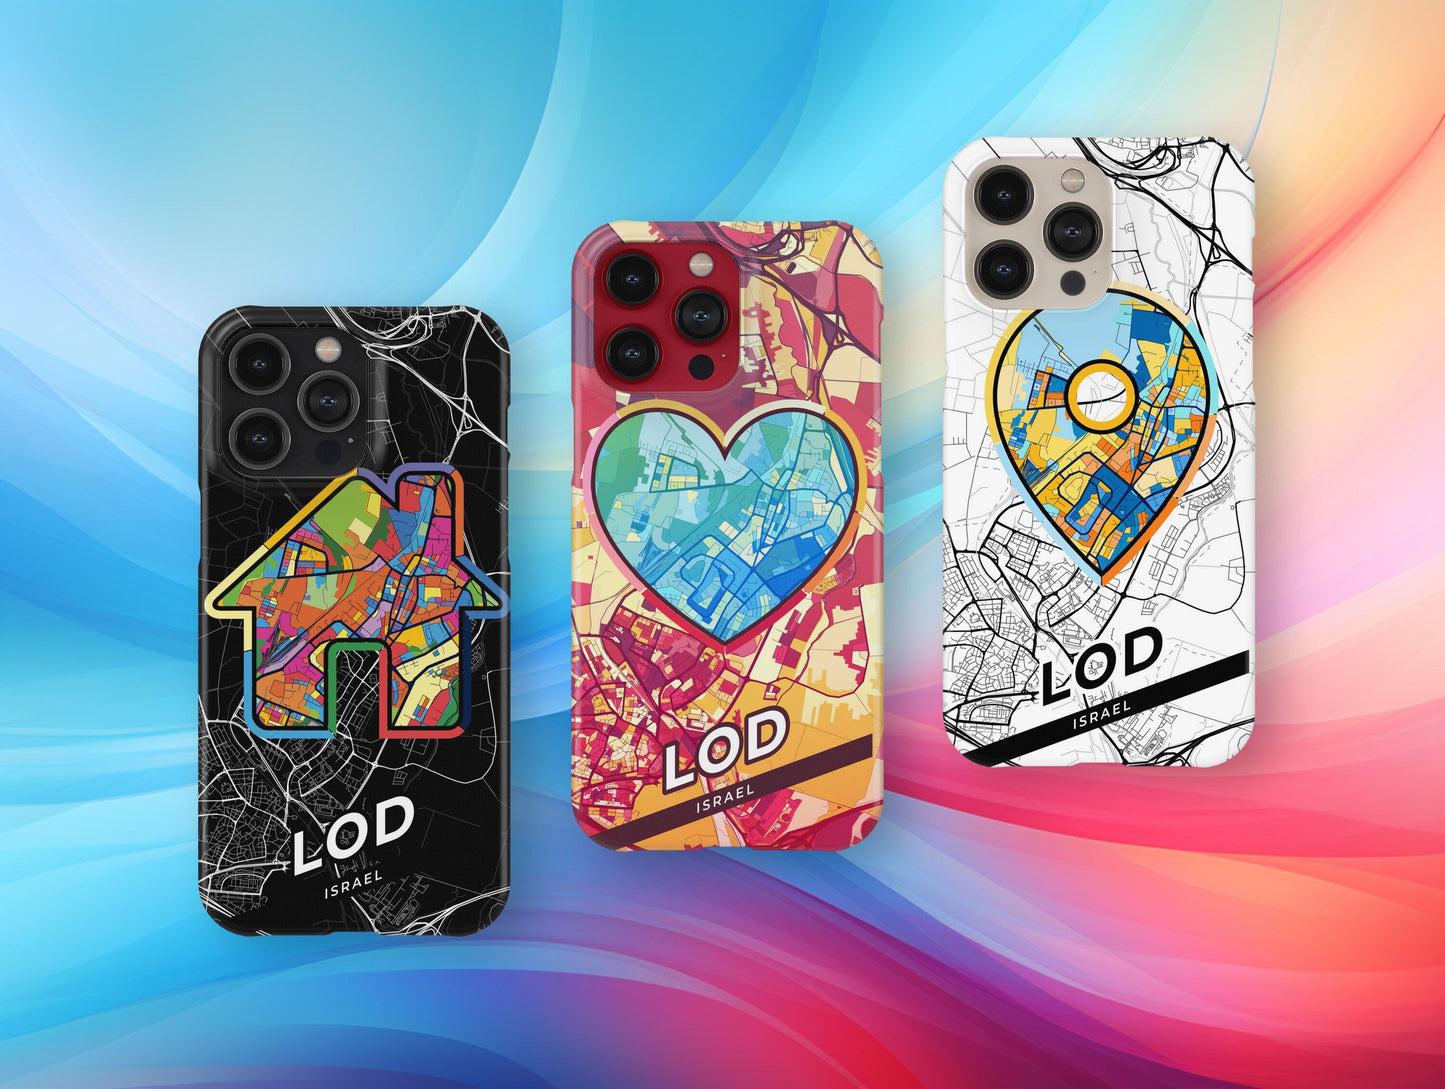 Lod Israel slim phone case with colorful icon. Birthday, wedding or housewarming gift. Couple match cases.